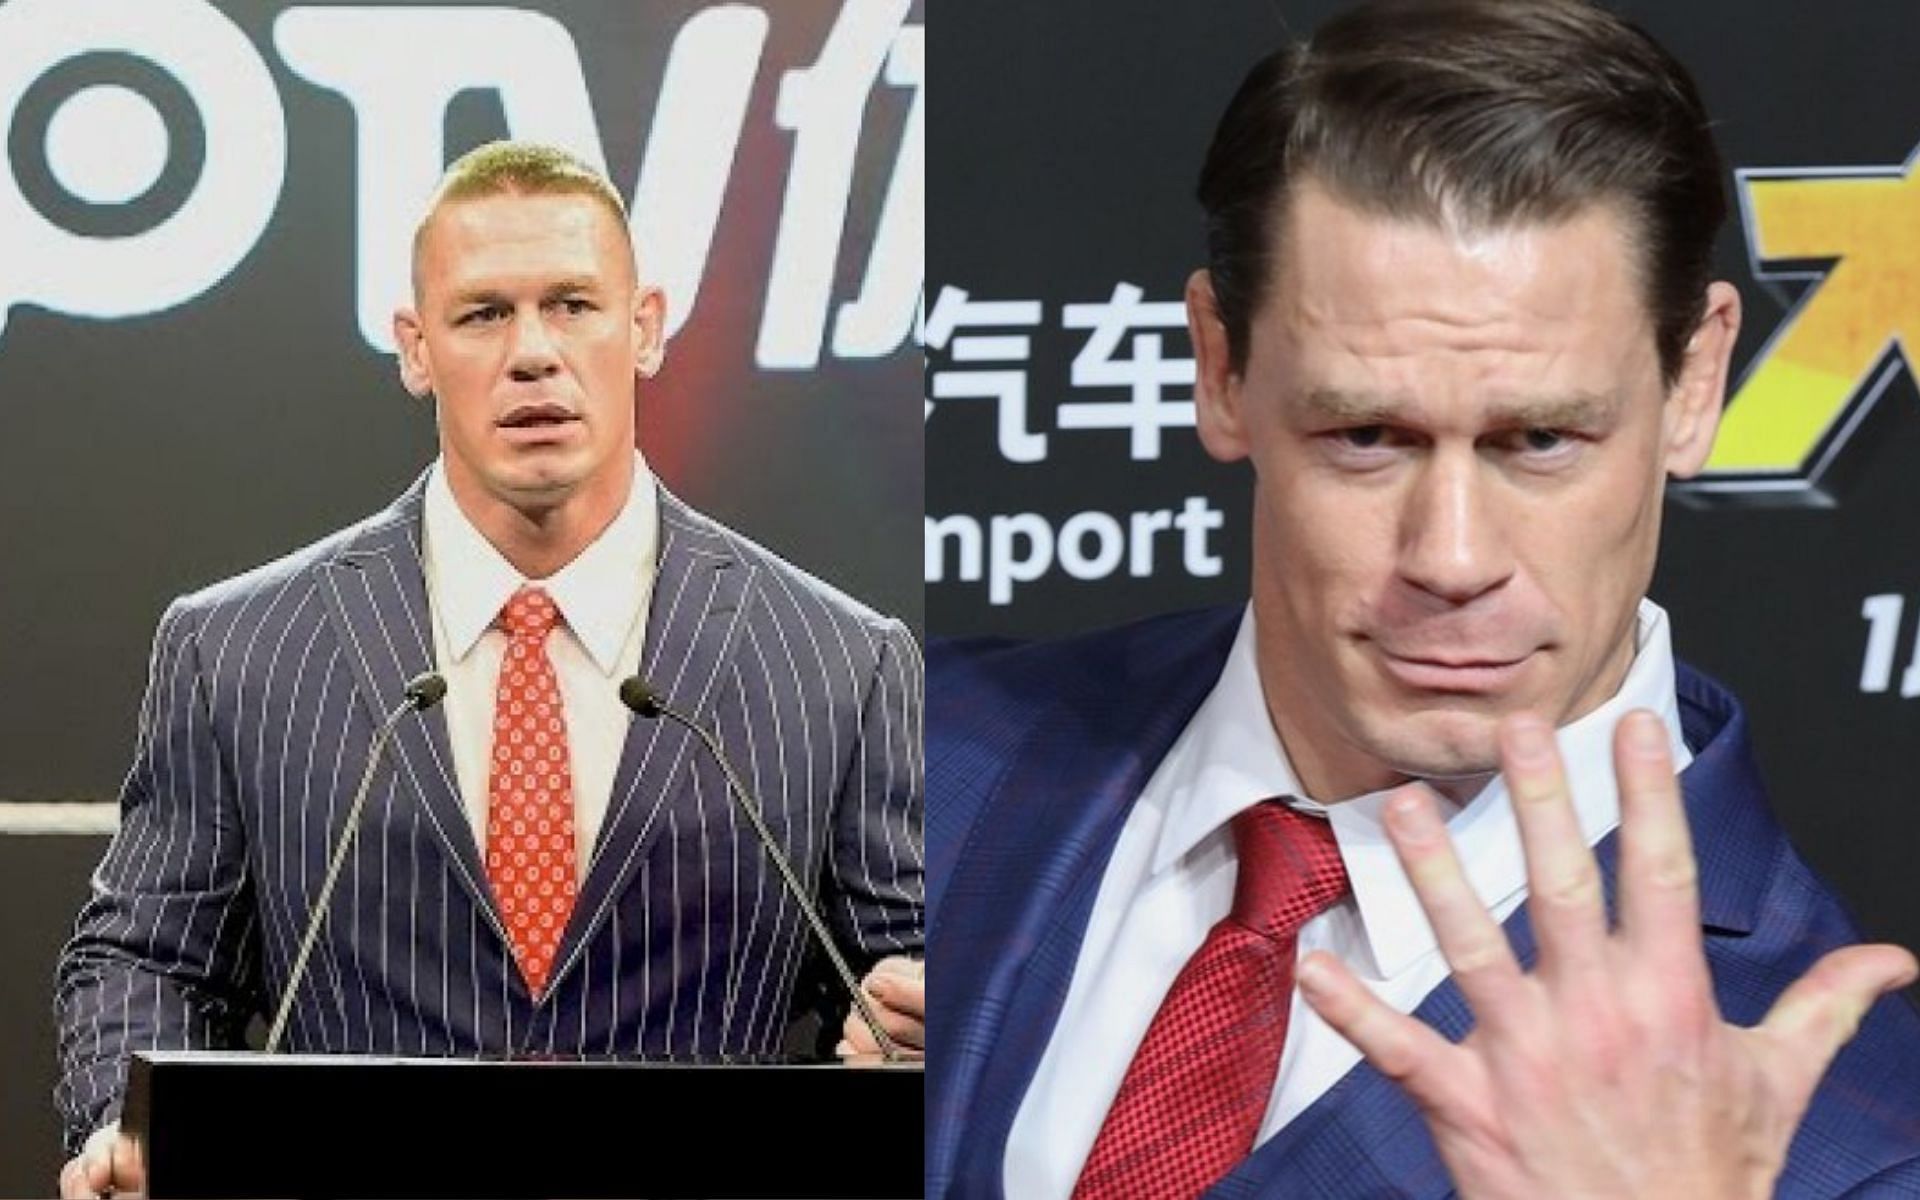 John Cena has fast become a star to watch out for in Hollywood